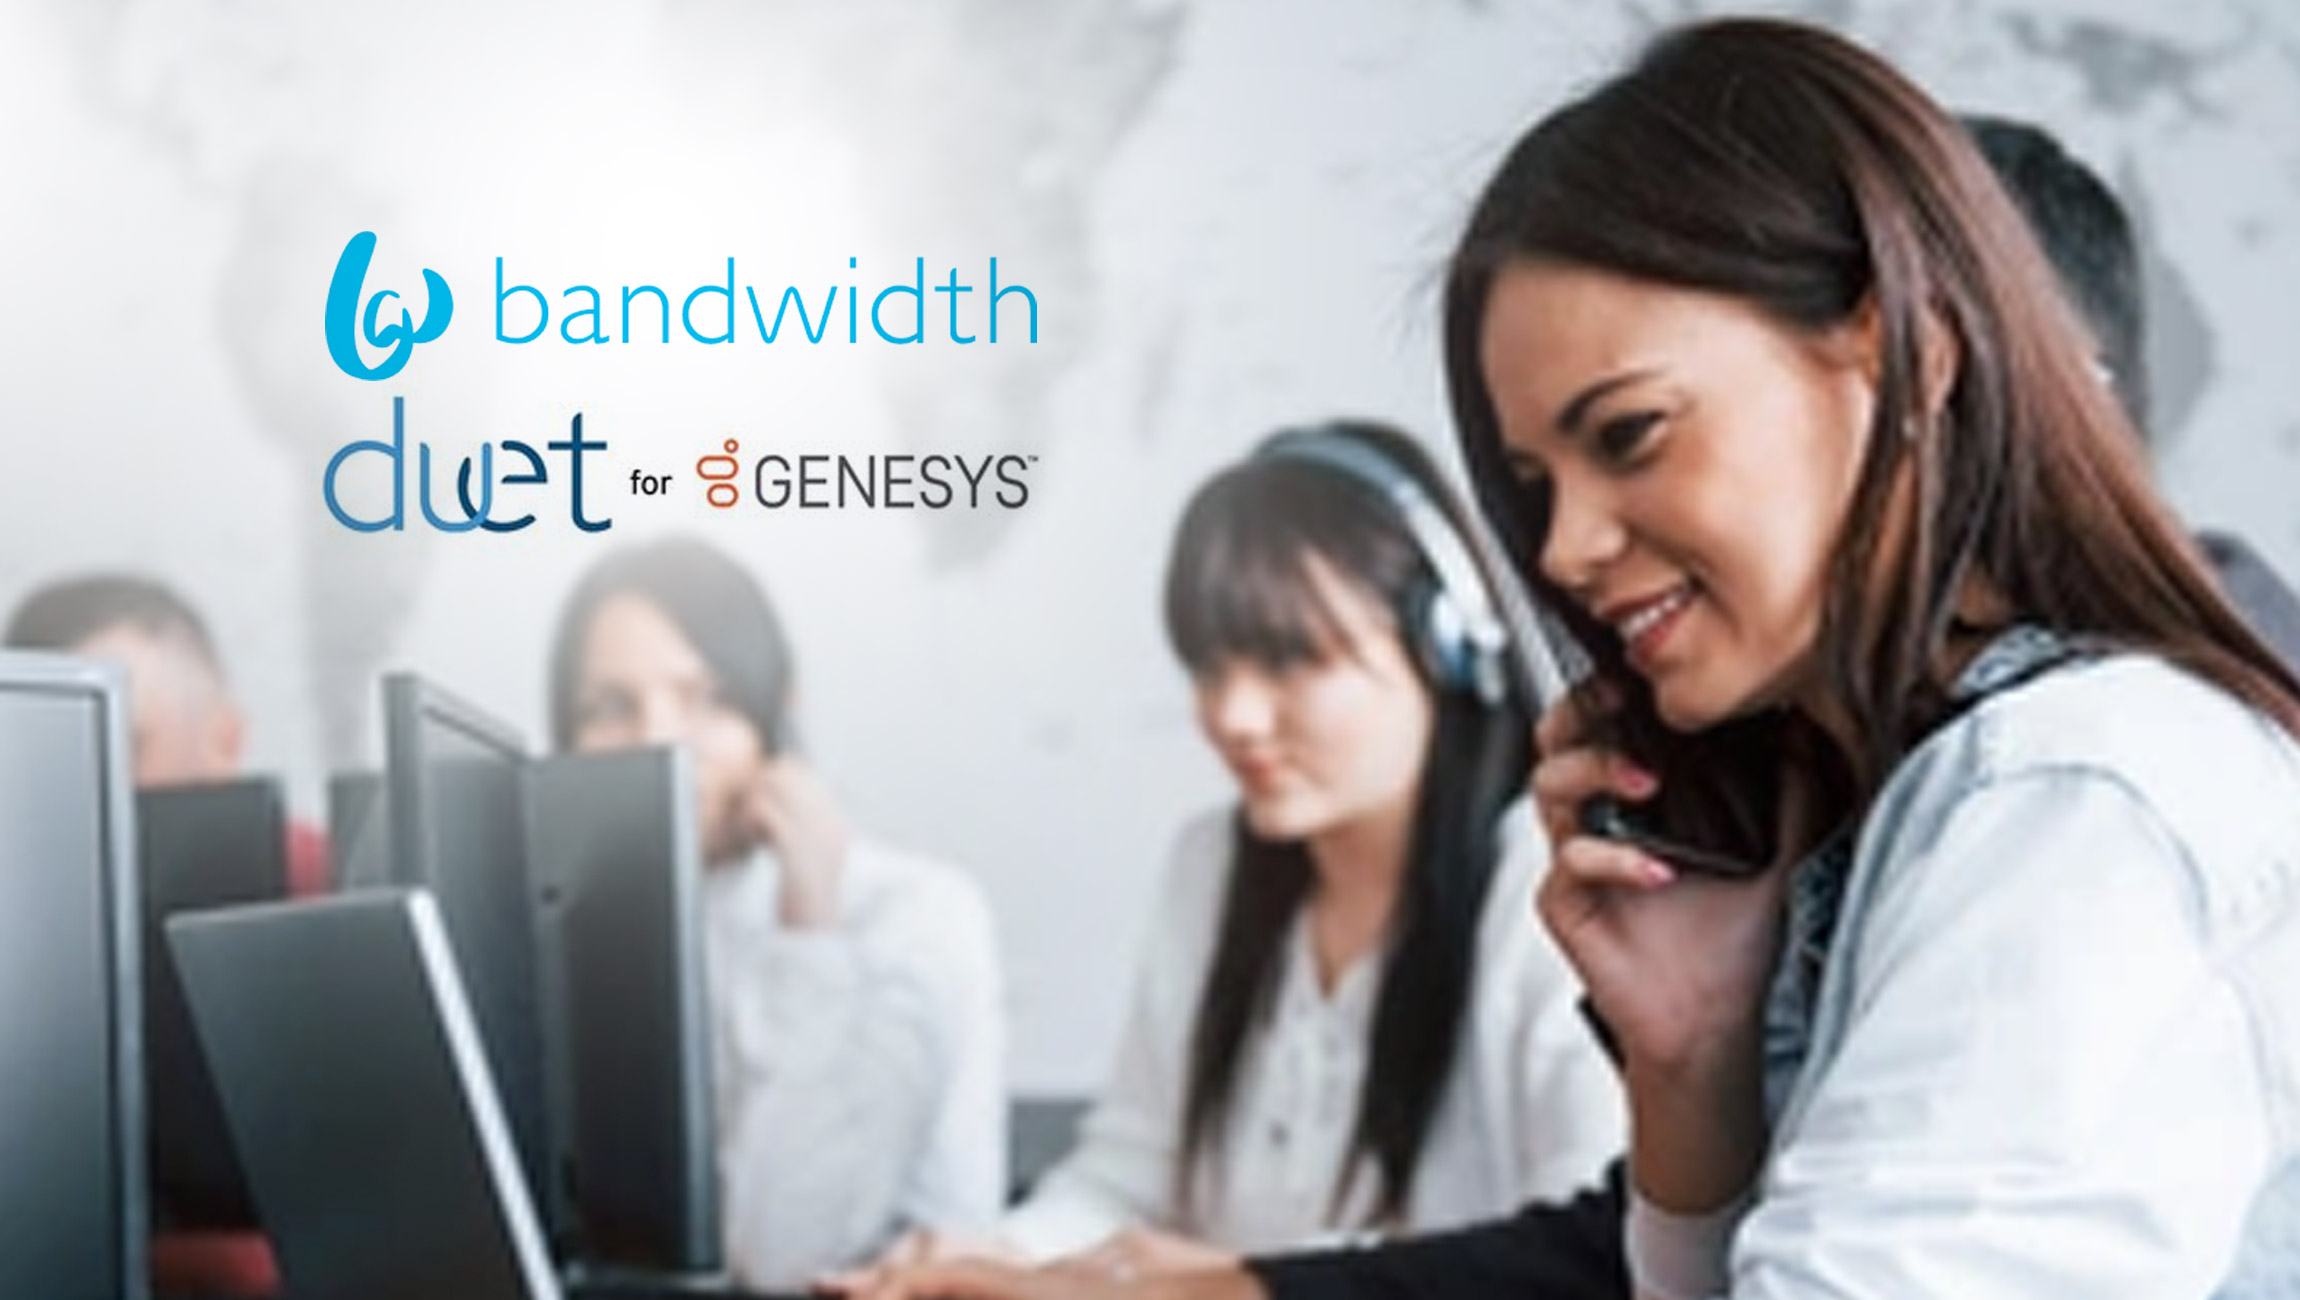 Bandwidth-Announces-Duet-for-Genesys--A-Global-BYOC-Solution-To-Accelerate-the-Enterprise-Contact-Center-Move-to-the-Cloud